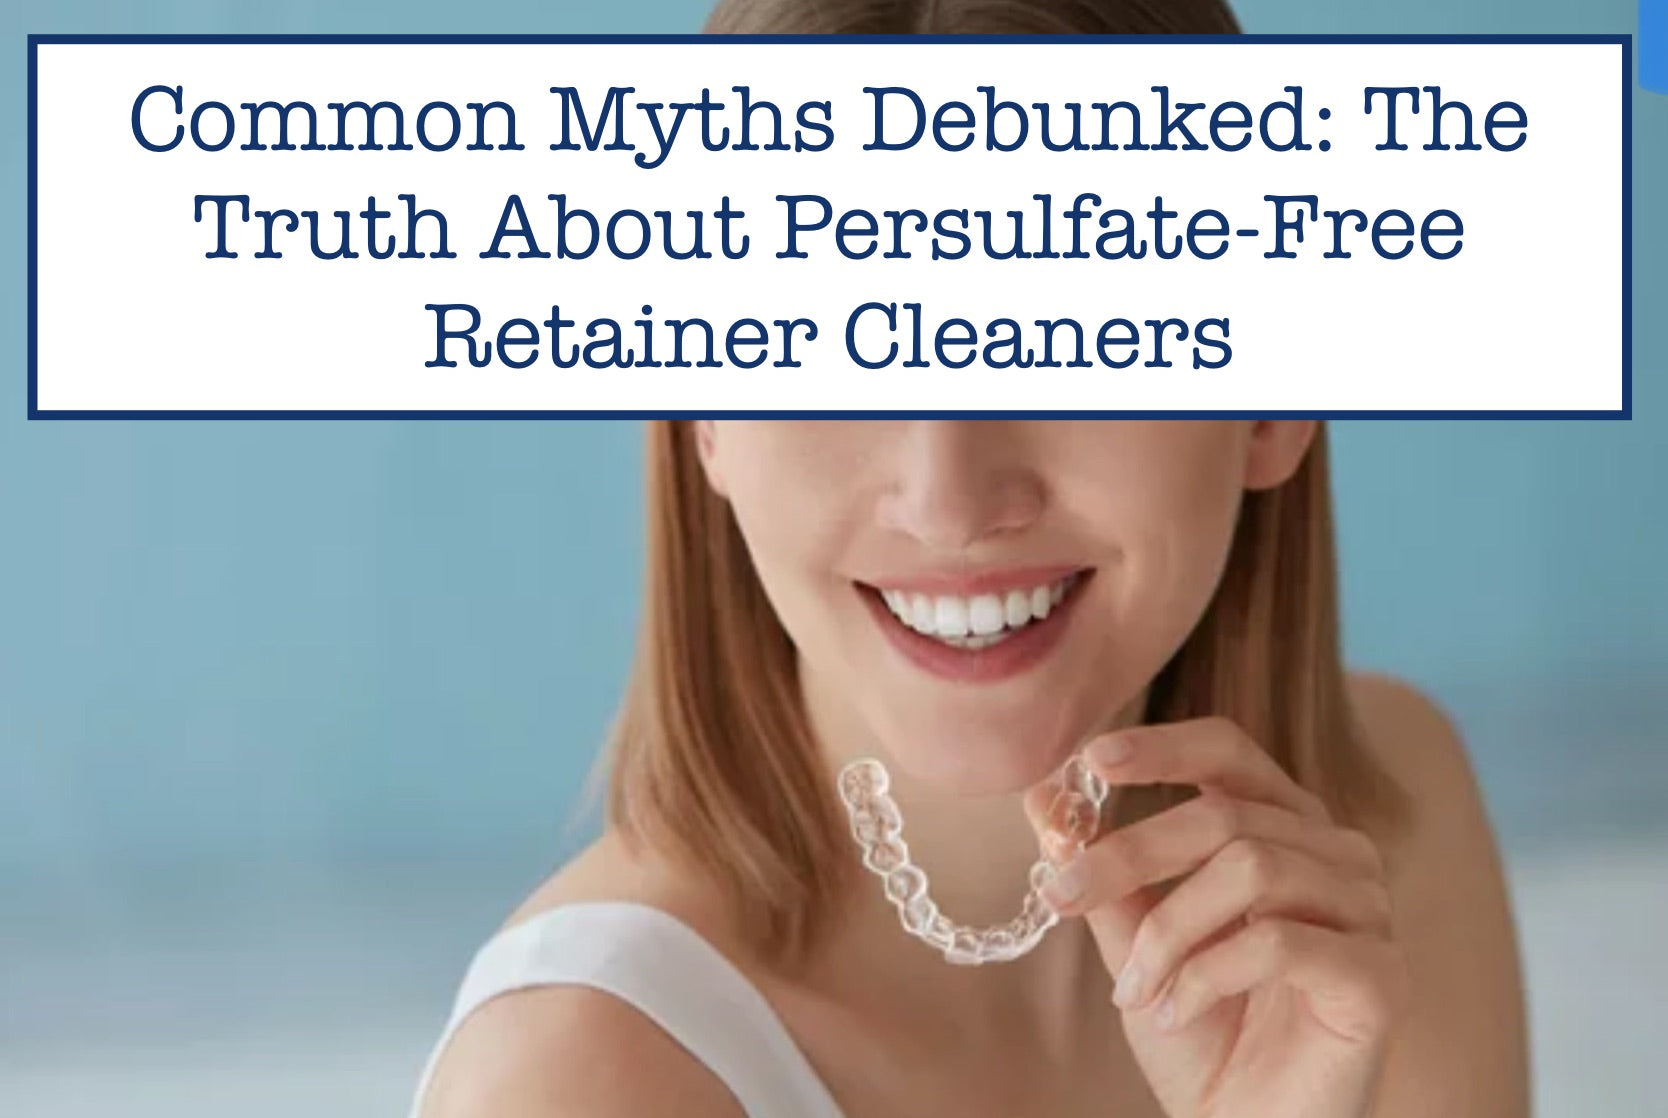 Common Myths Debunked: The Truth About Persulfate-Free Retainer Cleaners